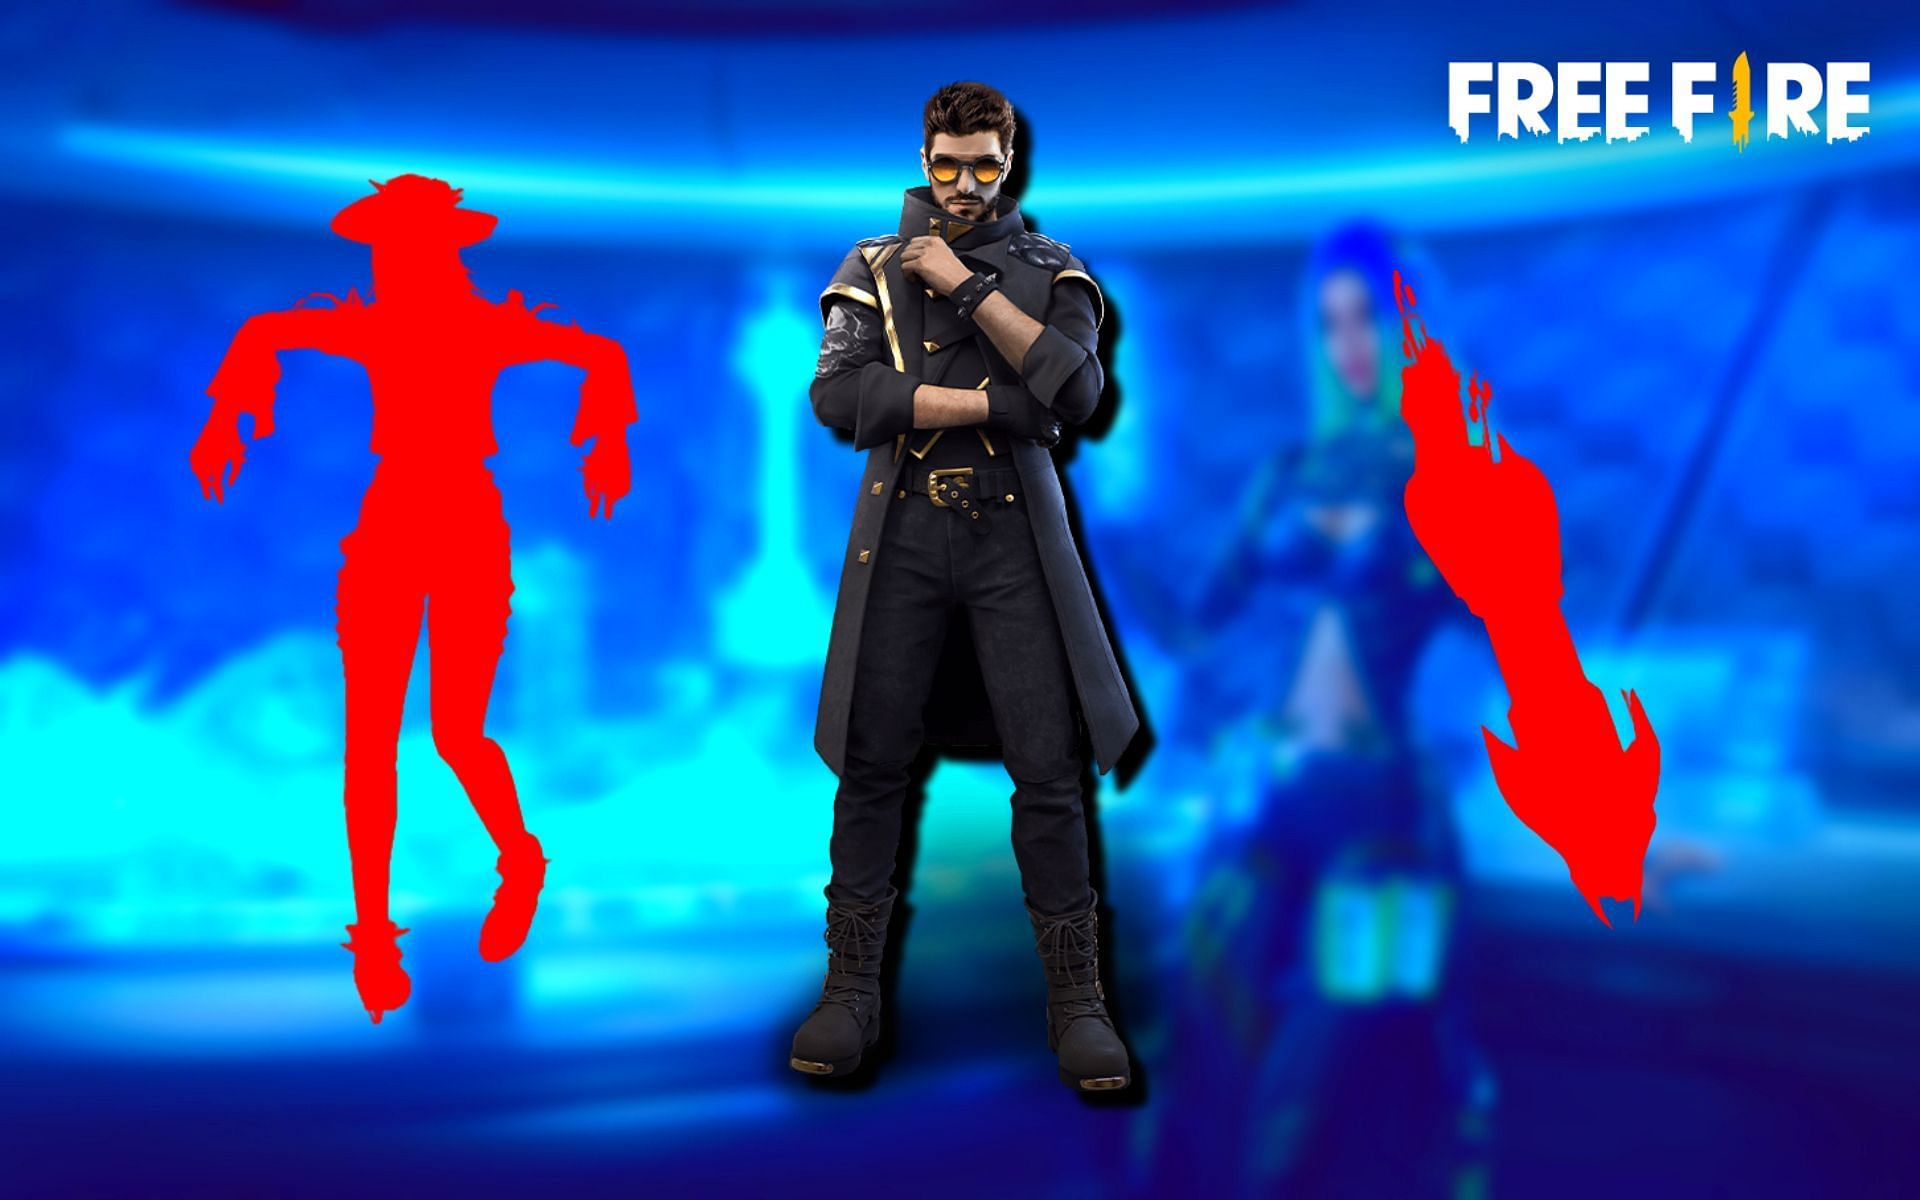 Redeem codes can reward skins, characters, and emotes within Free Fire (Image via Sportskeeda)